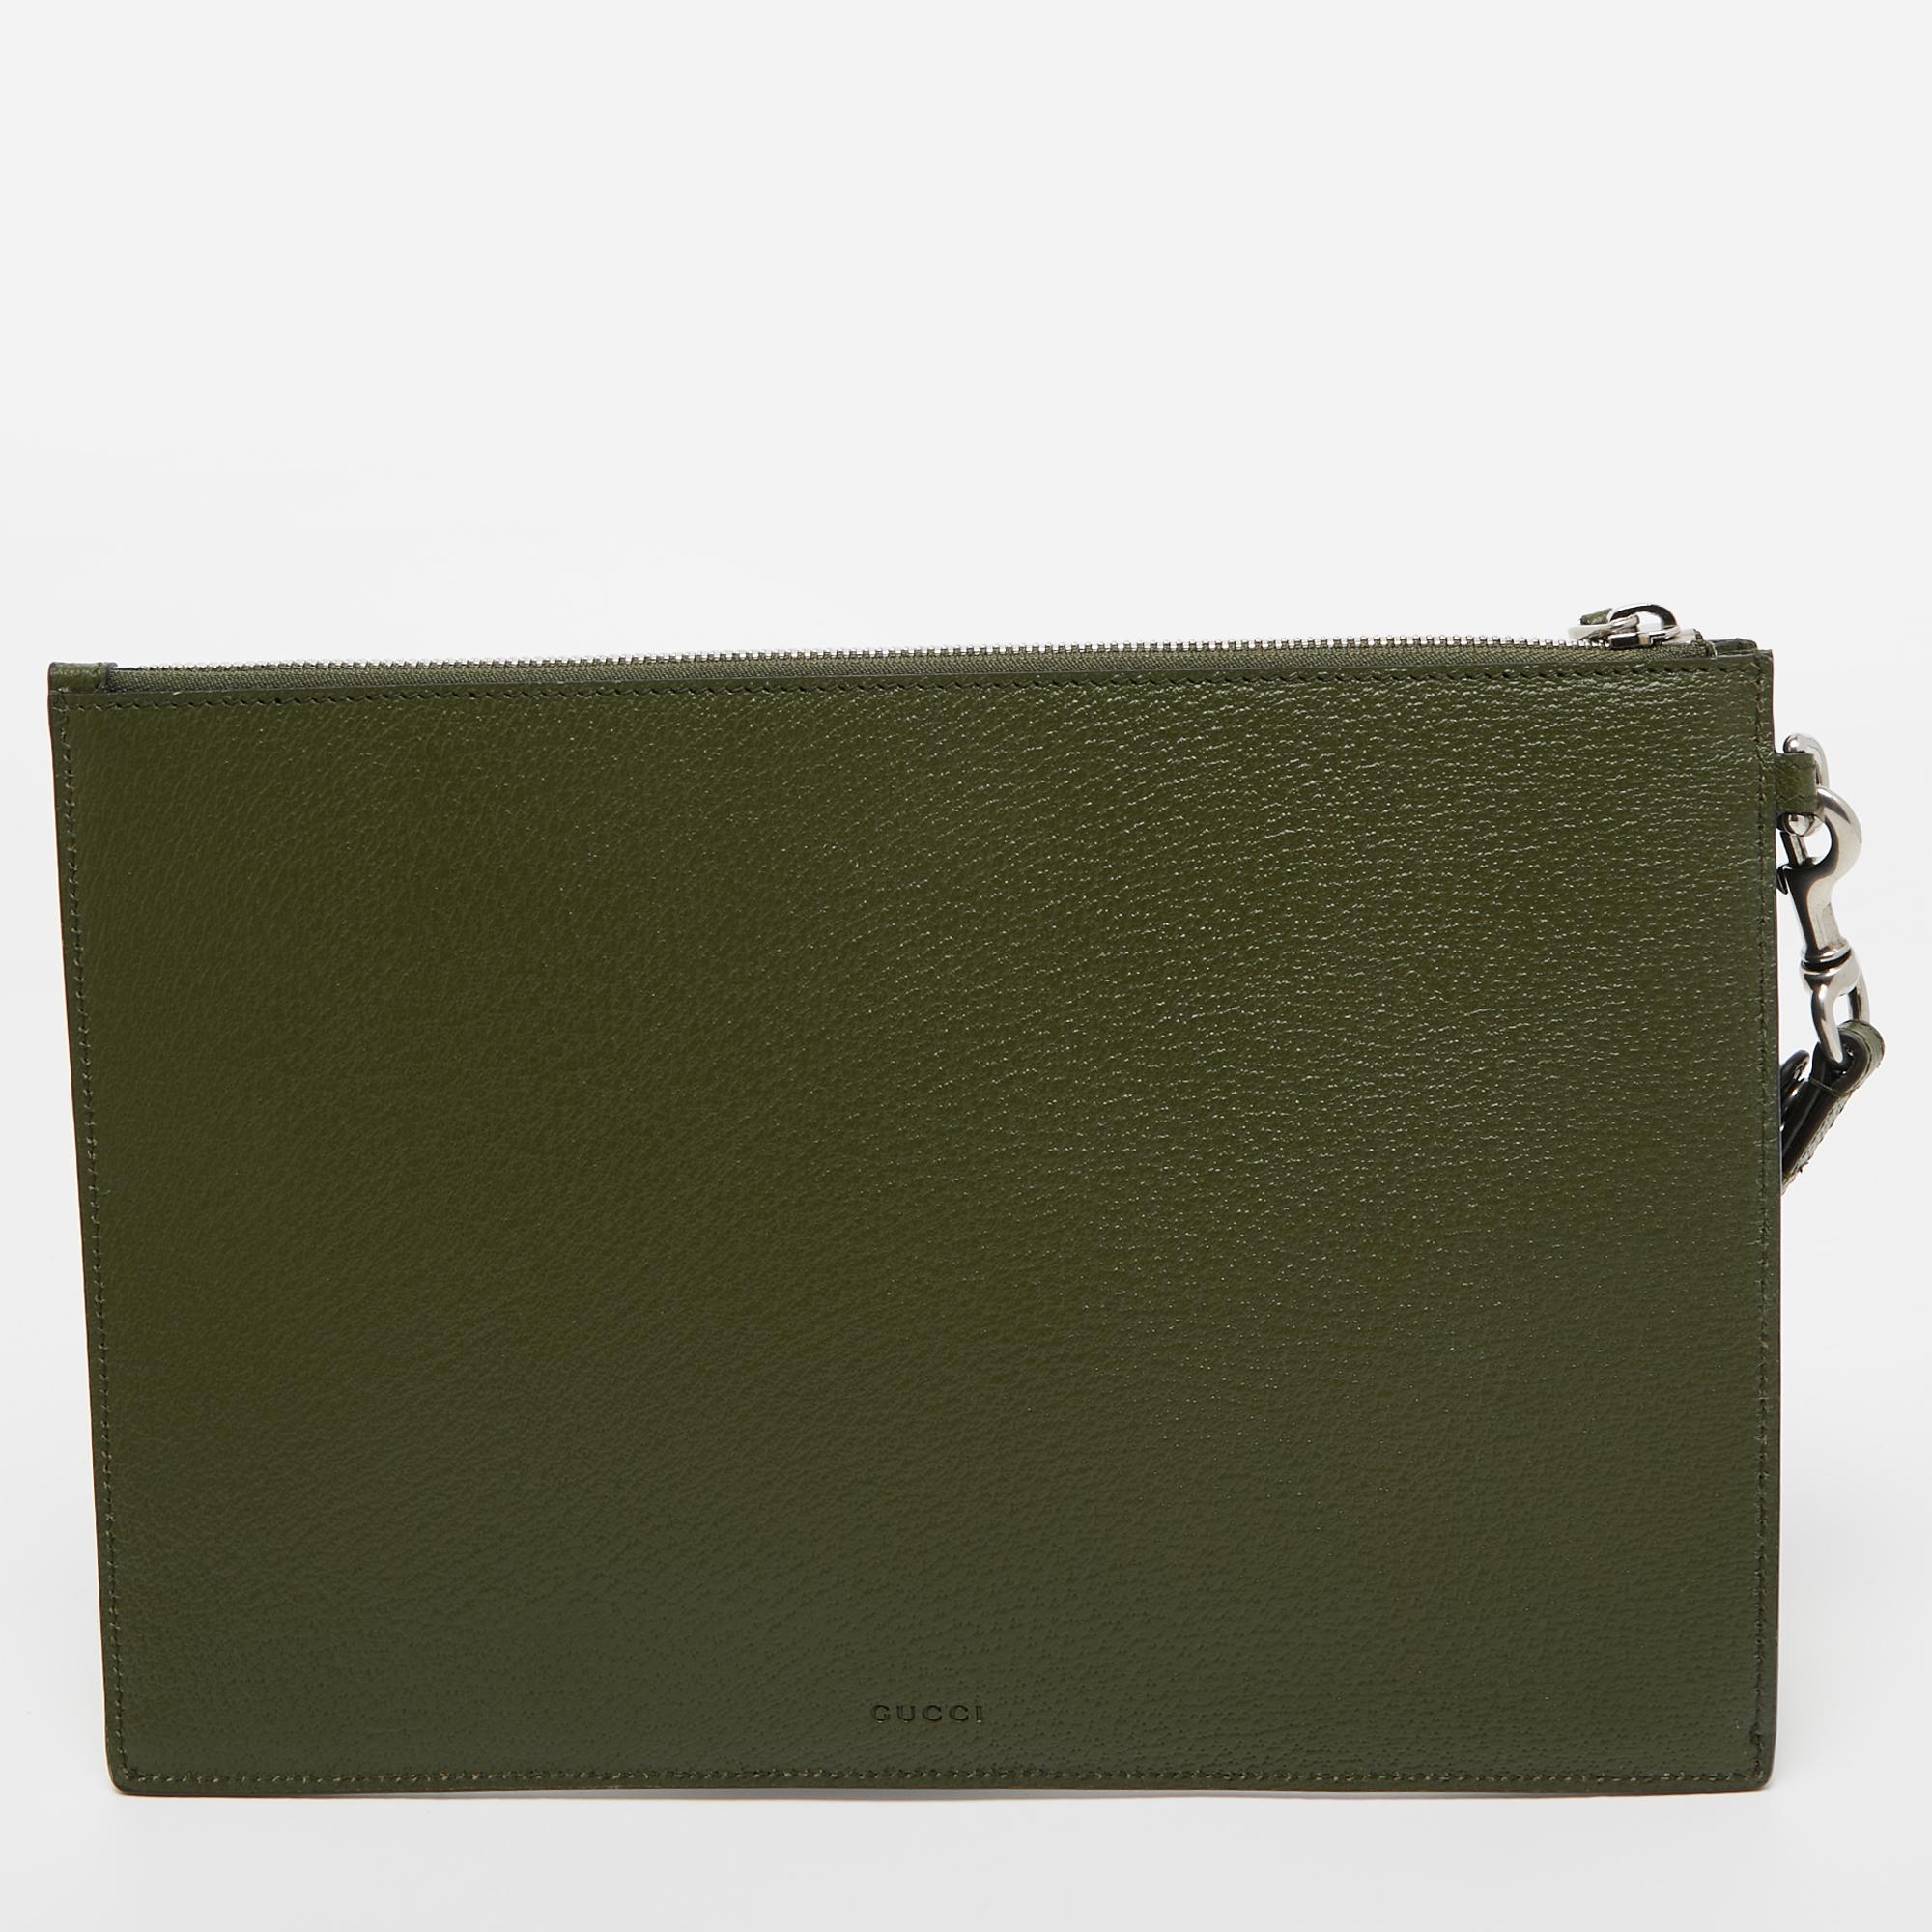 Easy to hold and perfect for housing your phone, keys, and cardholder, this Gucci pouch is a must-have. It is made of green leather and elevated with the GG logo on the front.

Includes: Original Dustbag, Original Box, Info Booklet